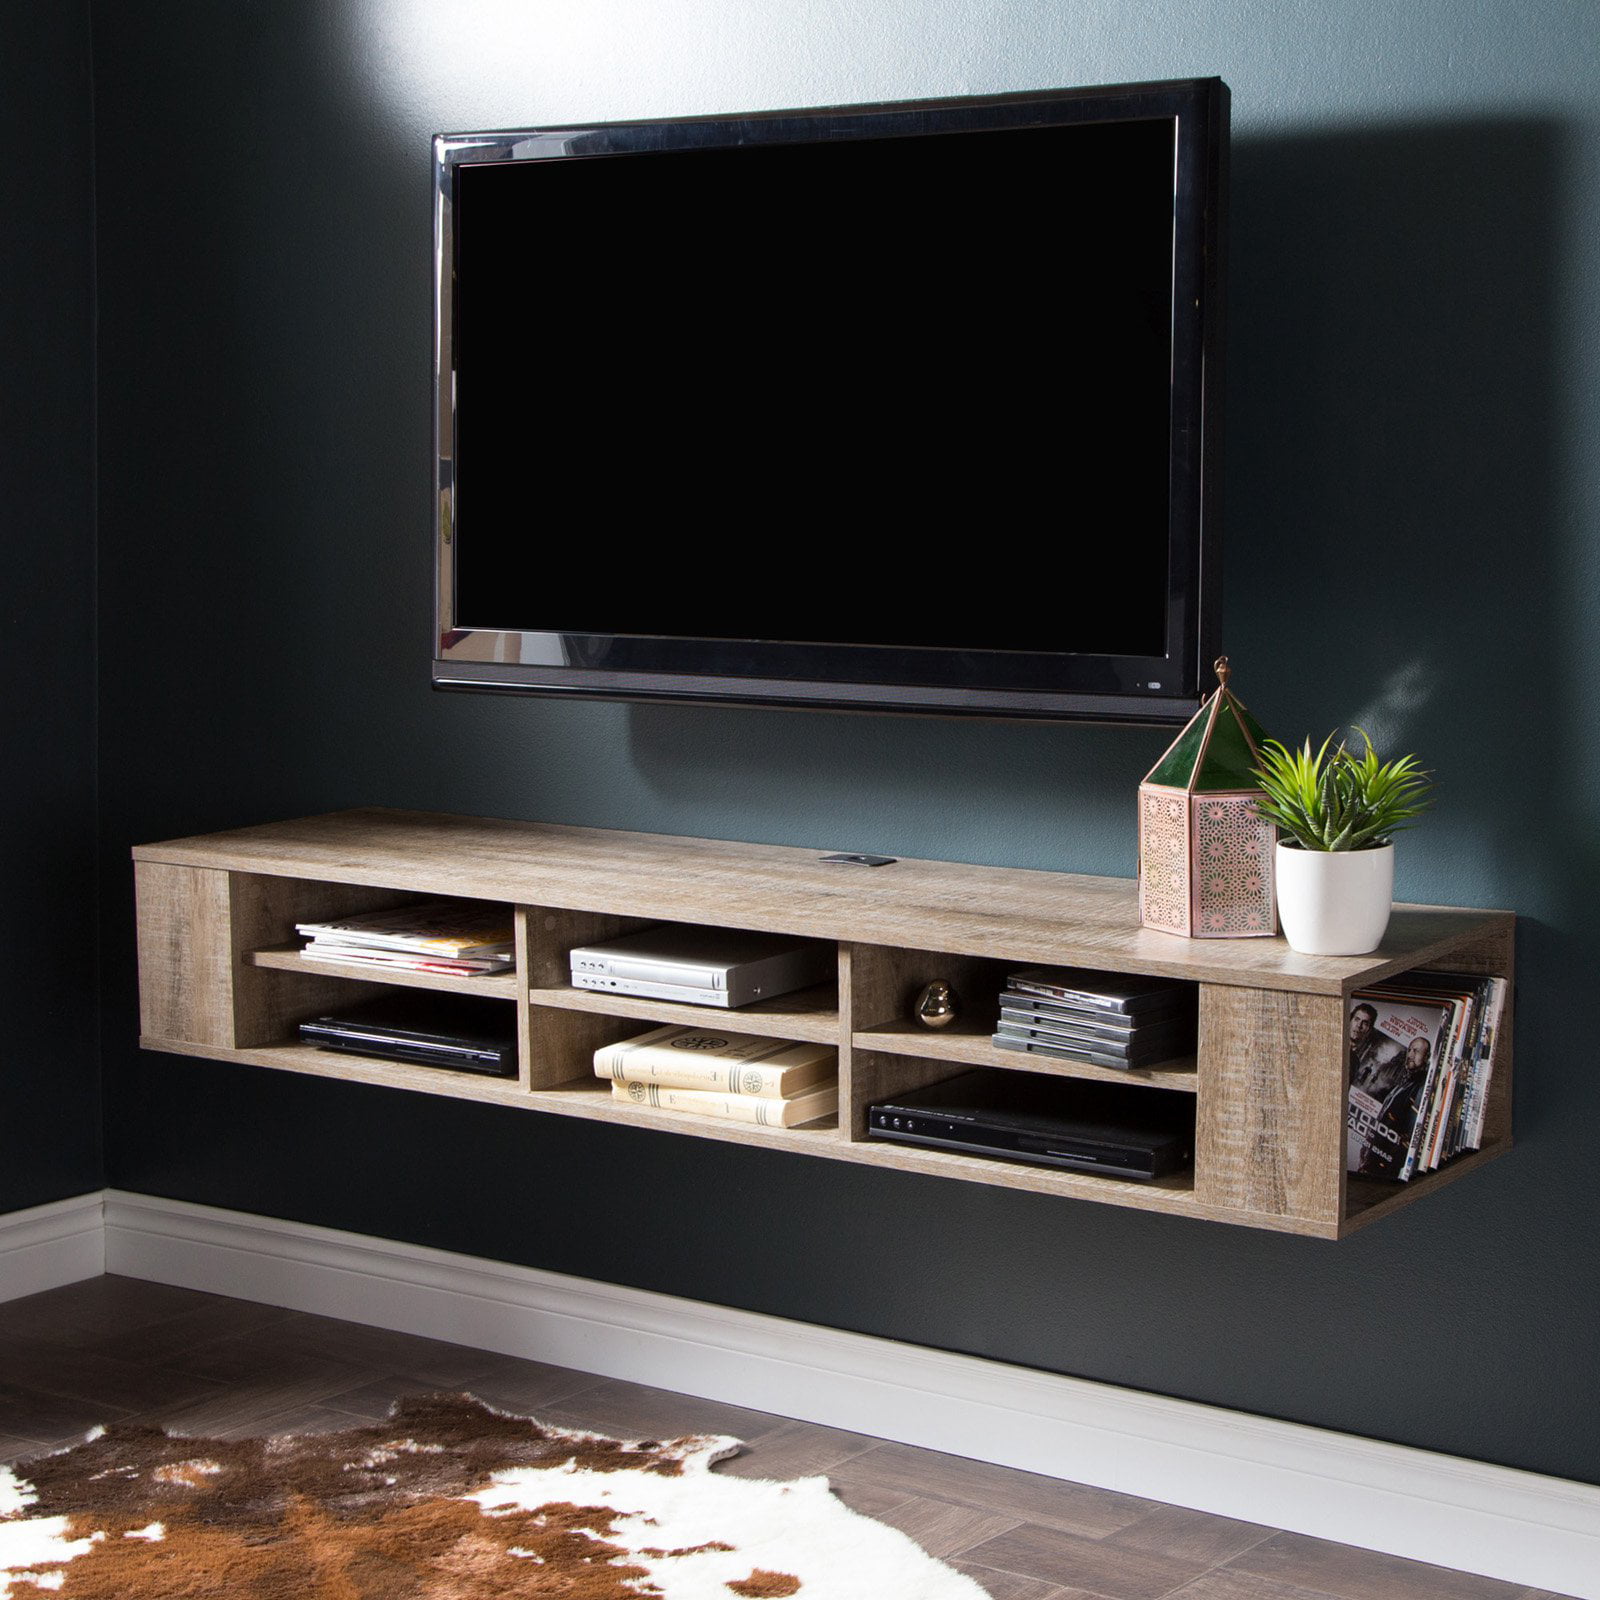 Furniture For Wall Mounted Tv Collection Furniture Of Gavinwebber Com